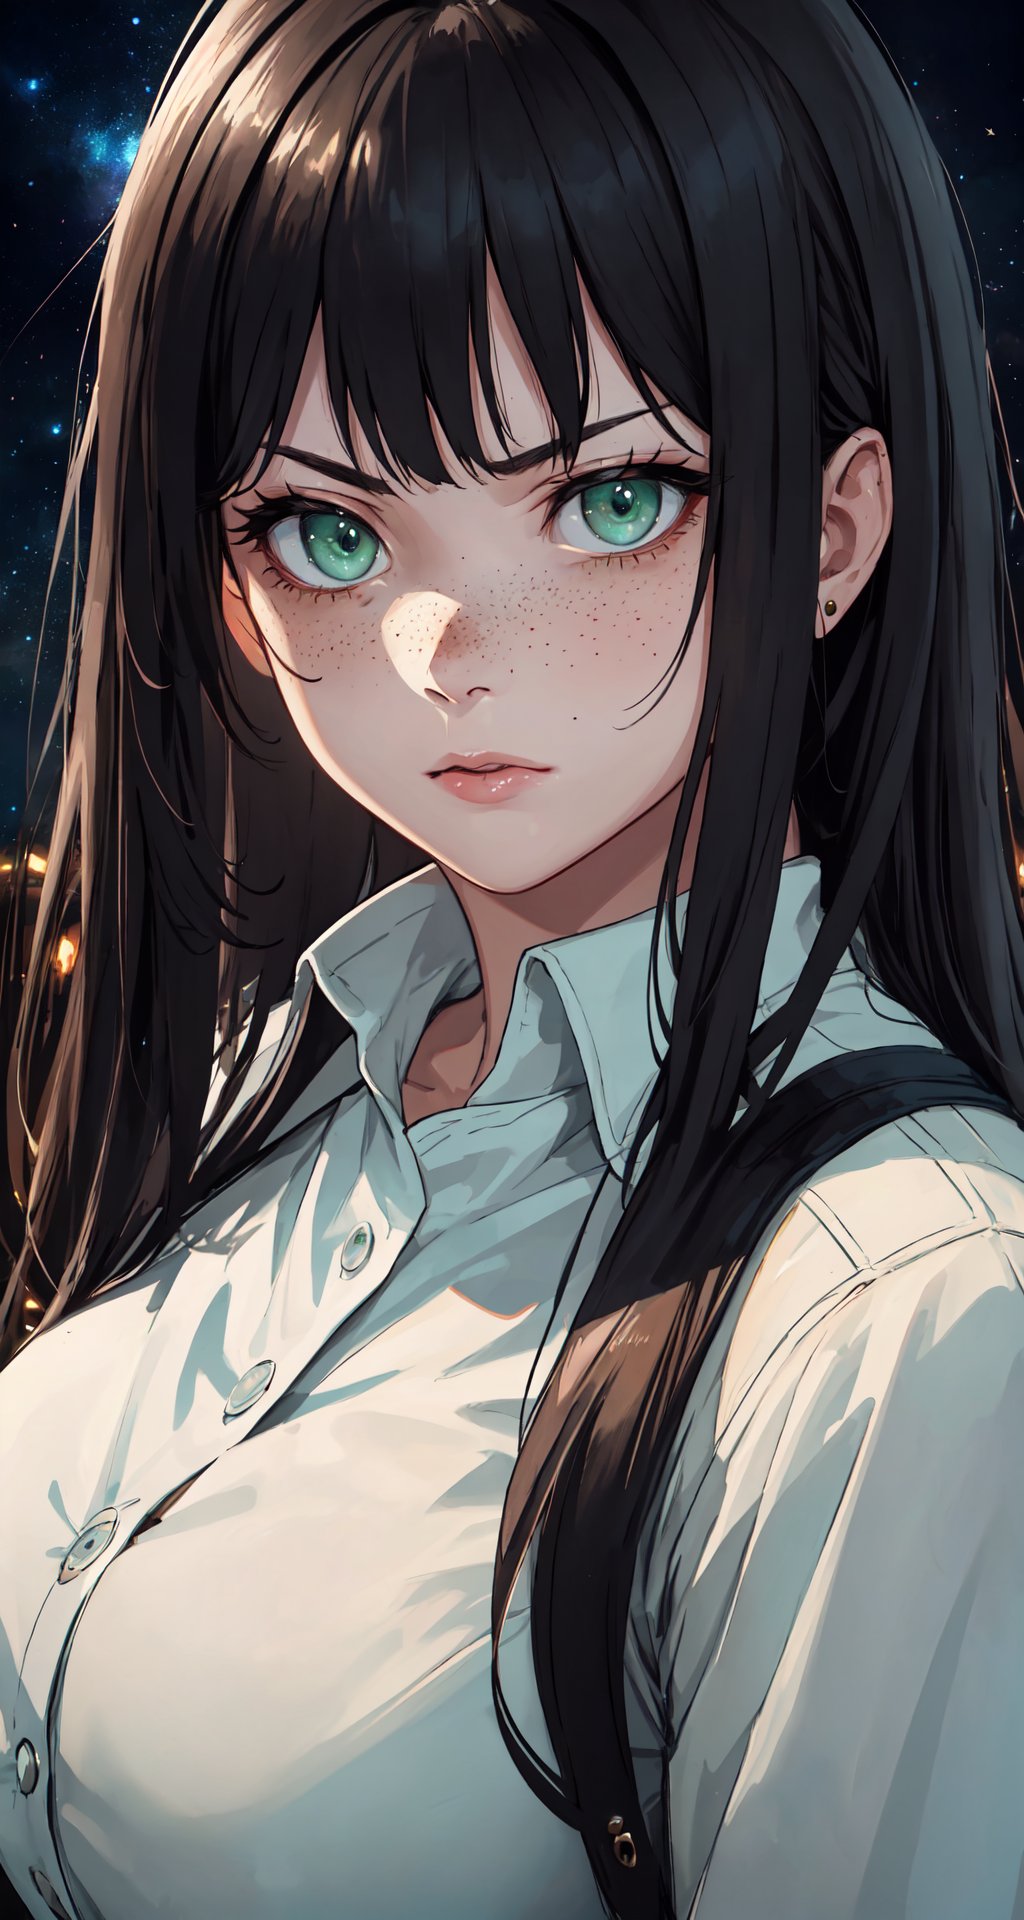 (4k), (masterpiece), (best quality), (extremely complex), (realistic), (sharp focus), (cinematic lighting), (extremely detailed), (epic), A close-up portrait of a chubby woman, serious look, deep look, incredibly detailed hand, long black hair, bangs, mint green eyes, freckles on face, white shirt with jacket on top, black jeans, curvy body, full body, detailed face, perfect eyes, detailed hands, mix of fantasy and realism. elements, vibrant manga, uhd image, vibrant illustrations, the background is a galaxy